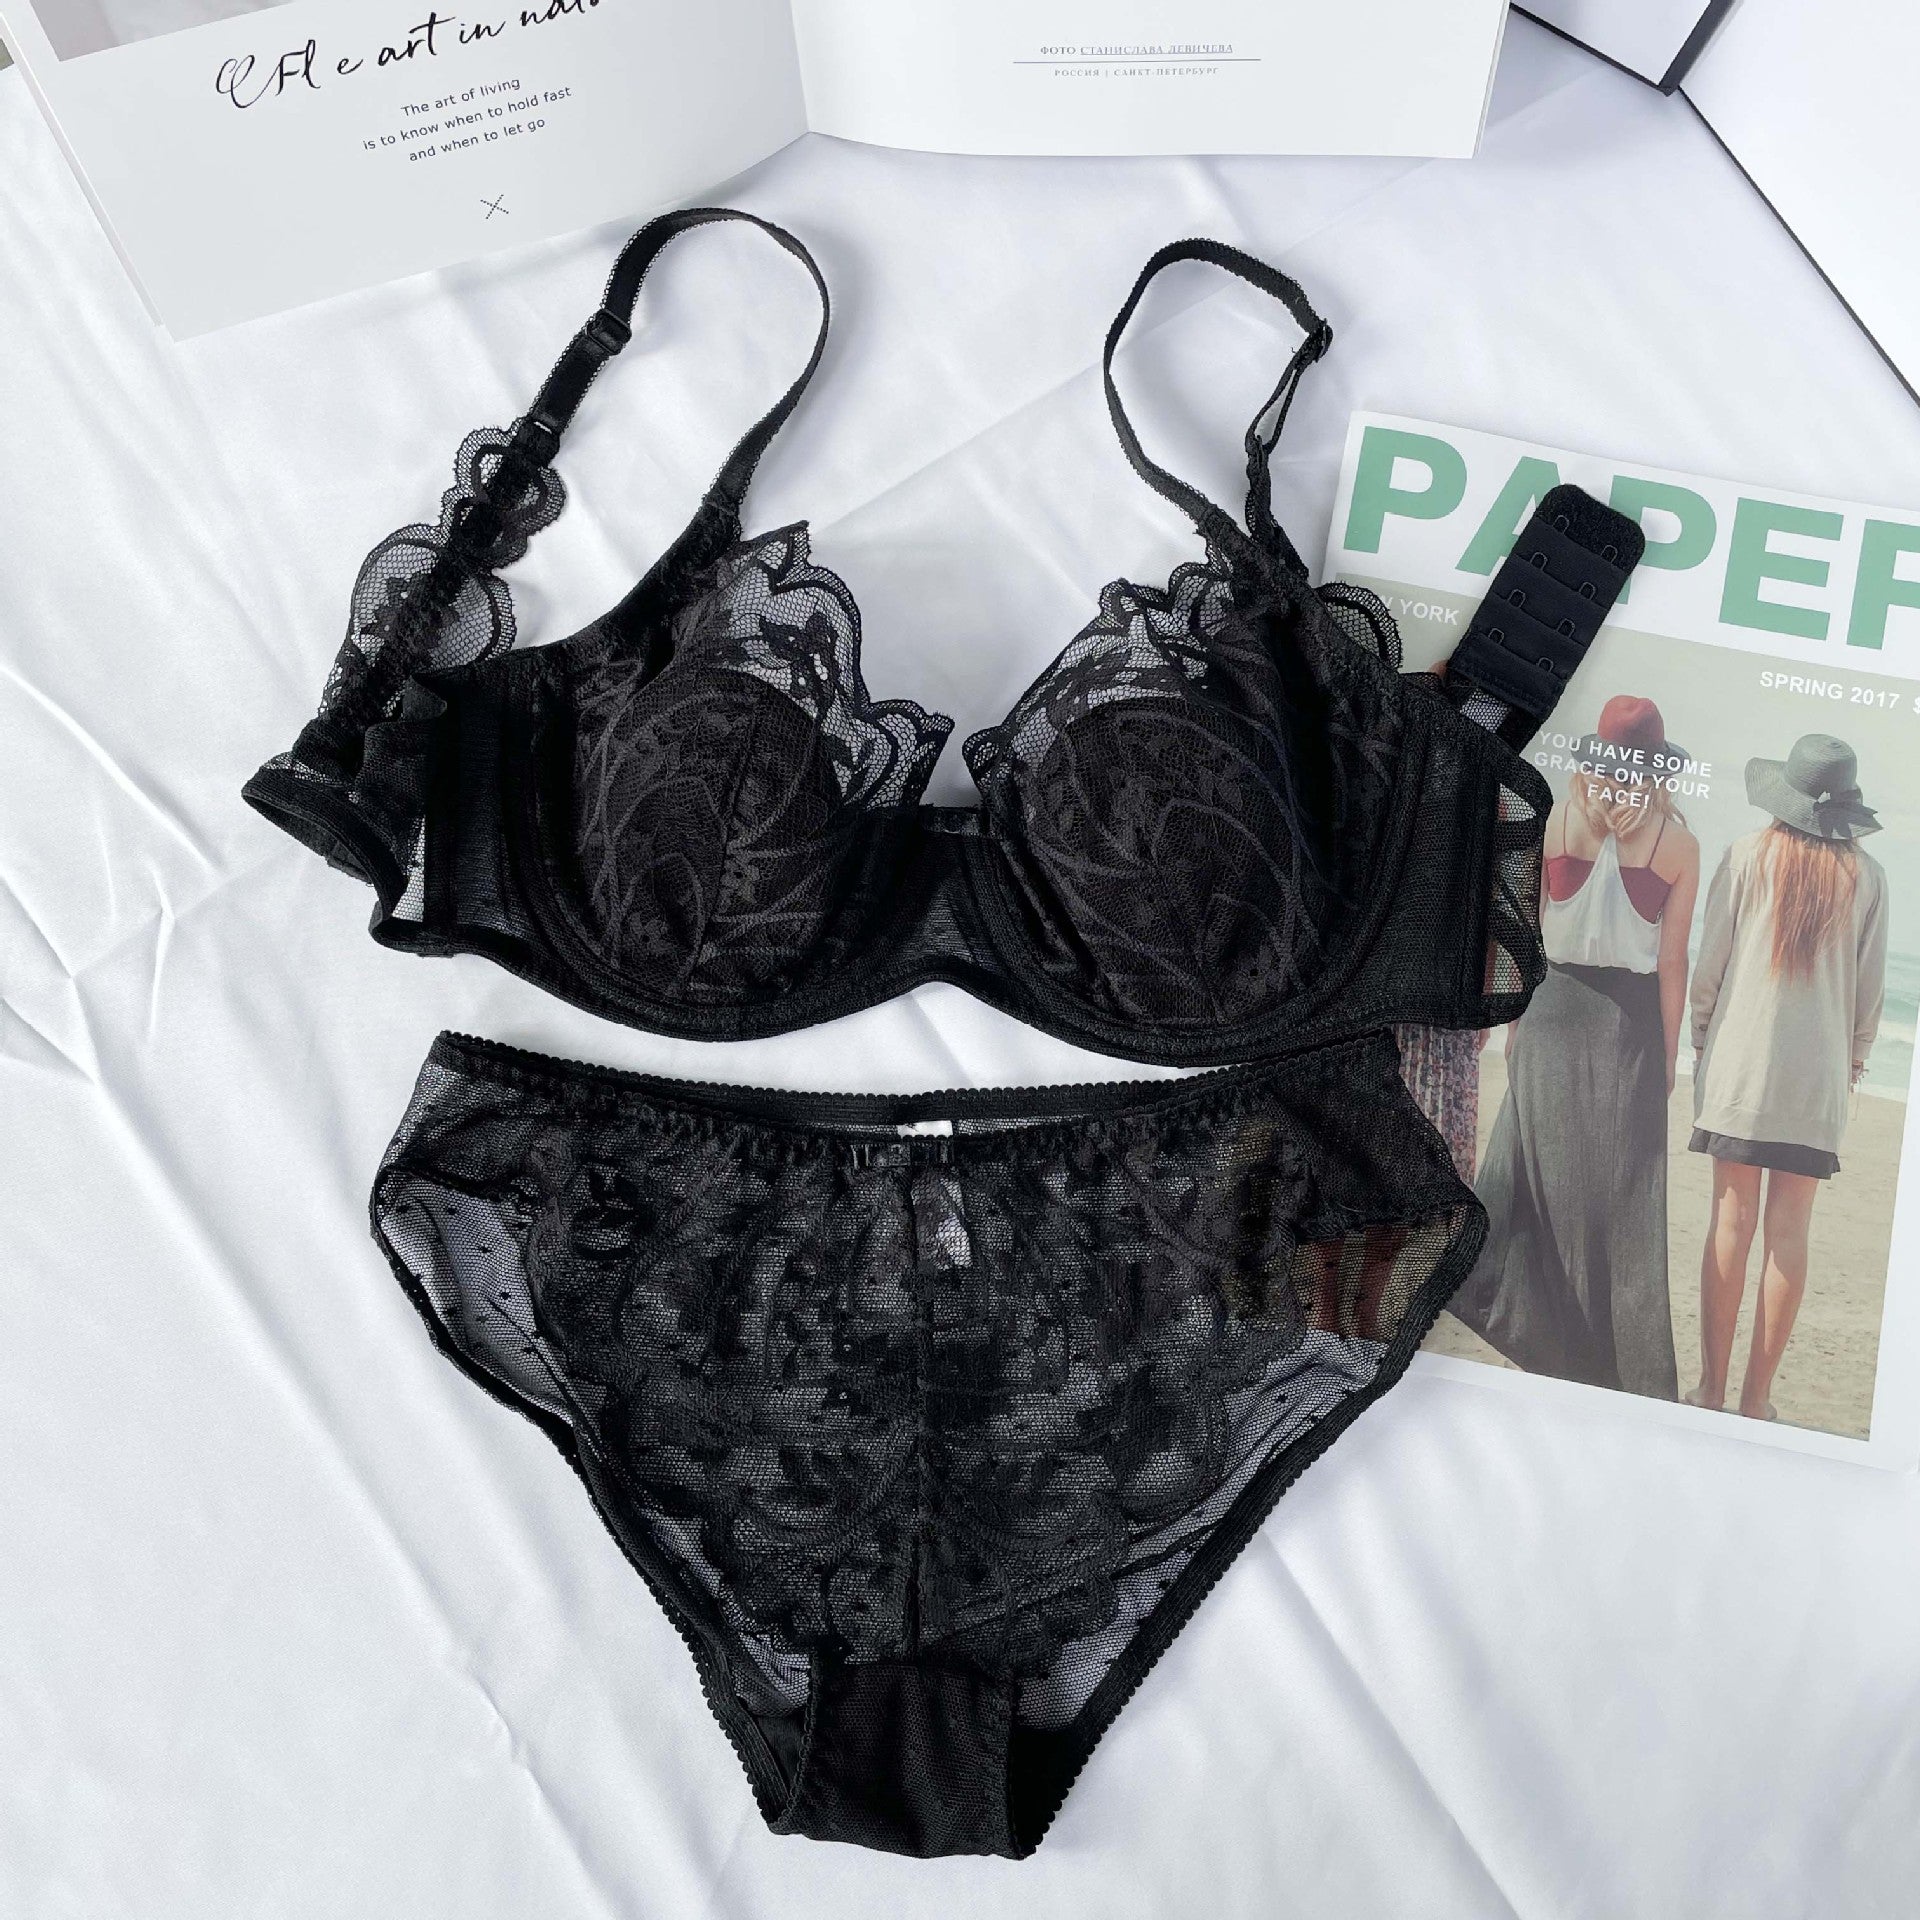 Plus Size Ultrathin Lace Bra And Panty Set Back With Fashion Embroidery  Black From Qz46, $19.74